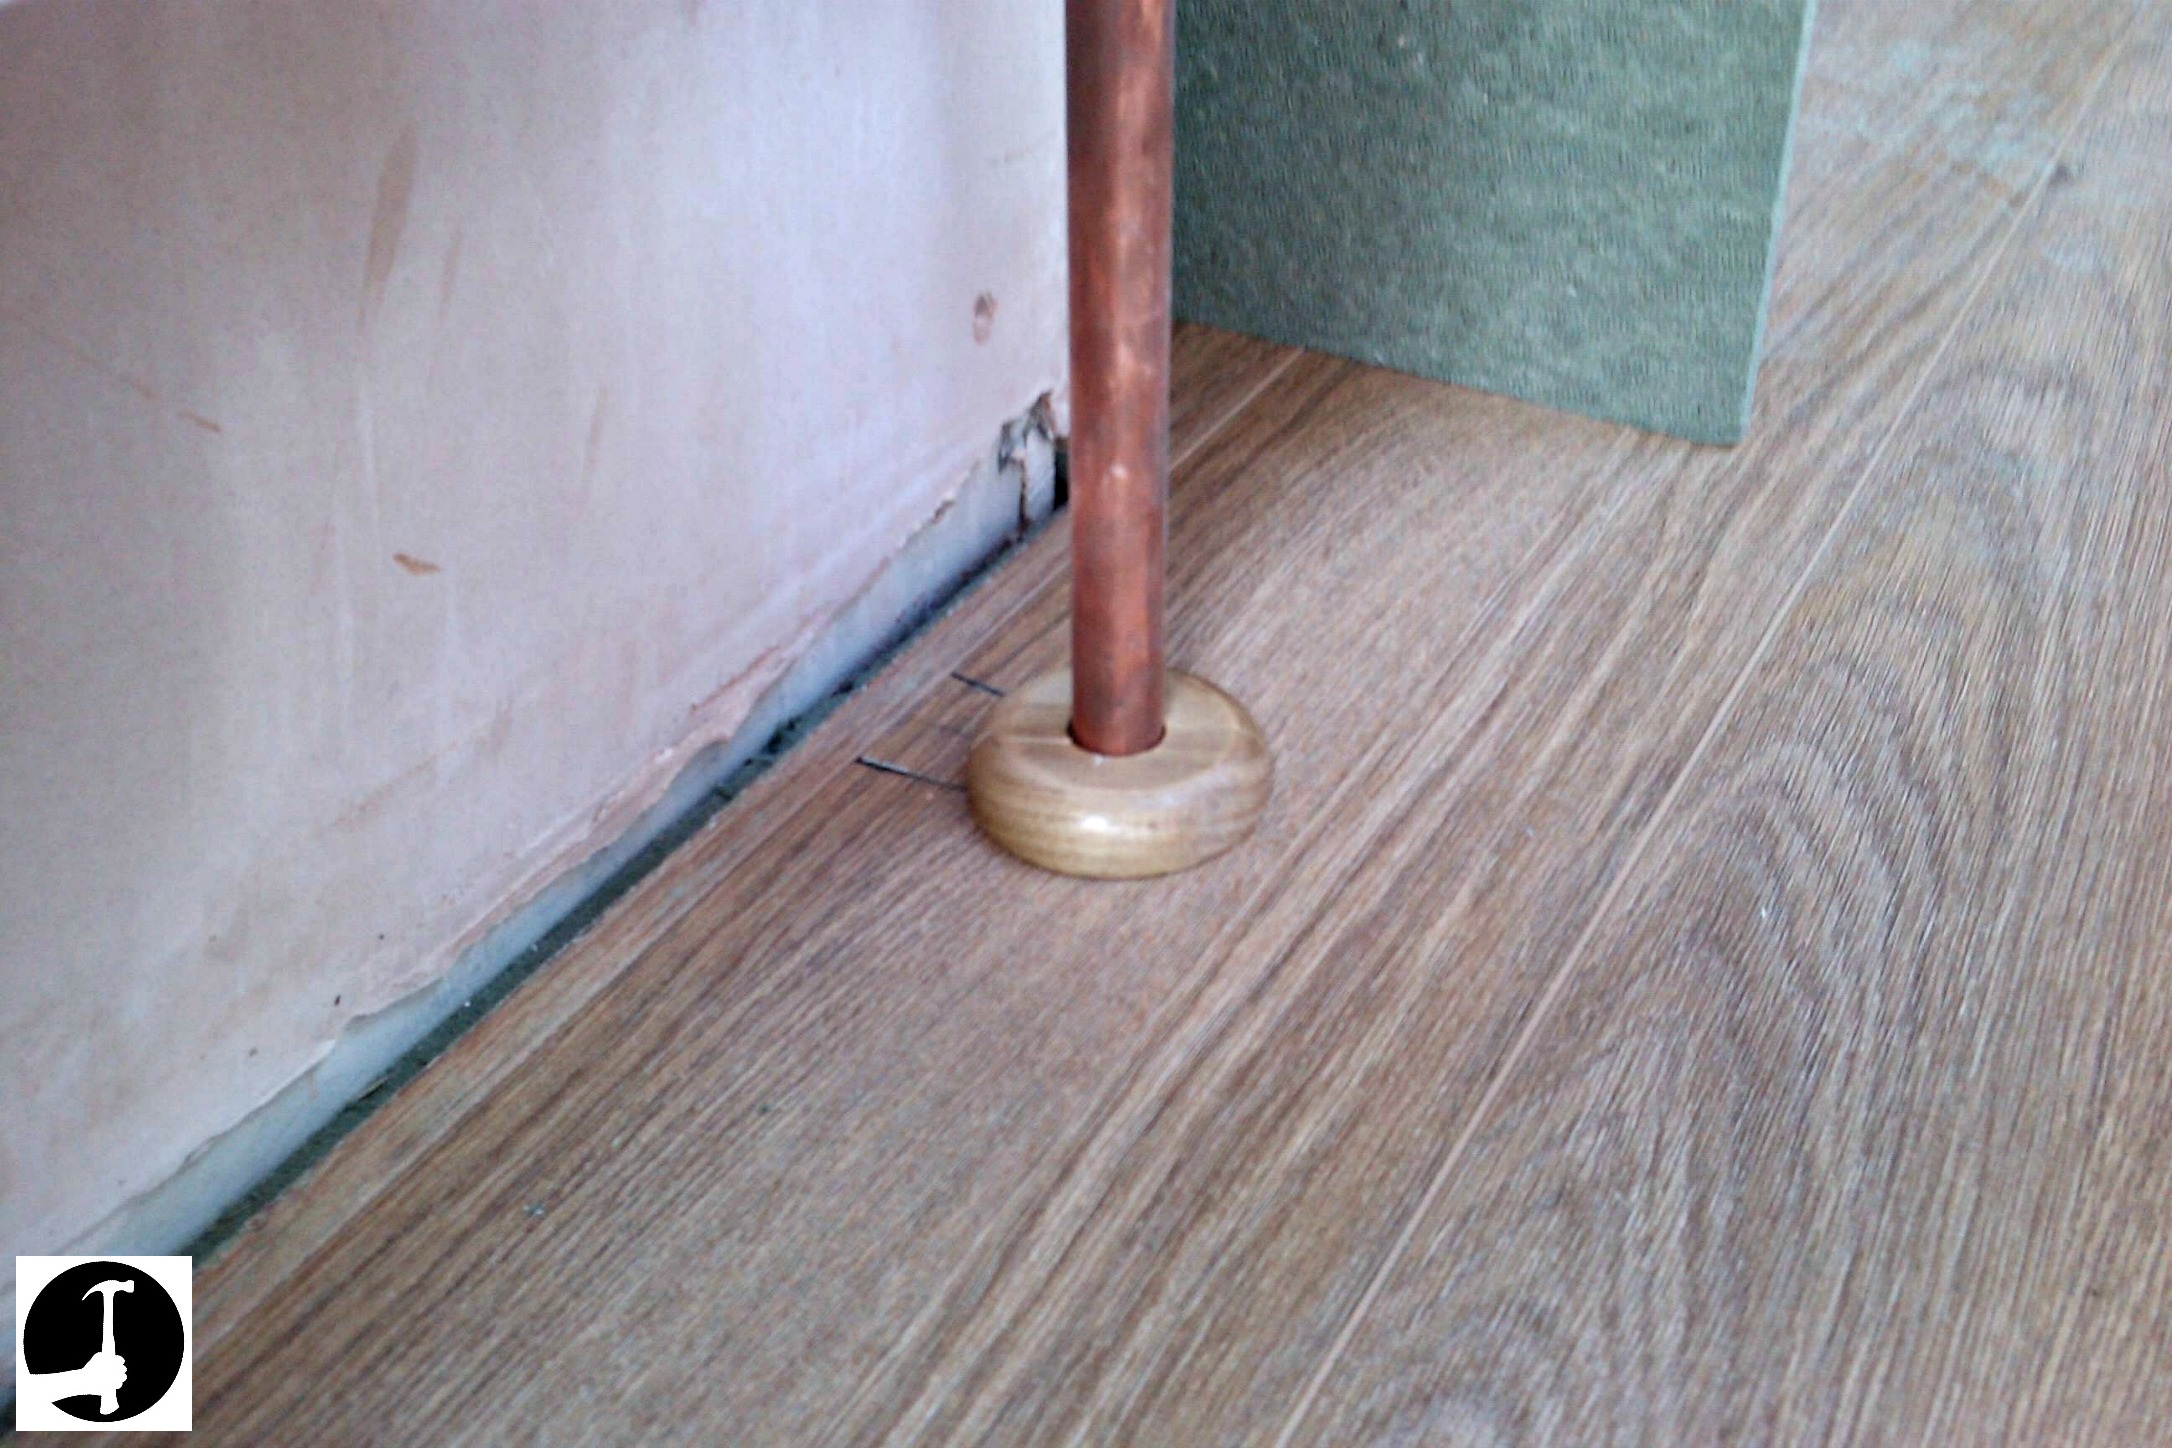 See How I Install Laminate Flooring To, Best Way To Cut Laminate Flooring Around Radiator Pipes